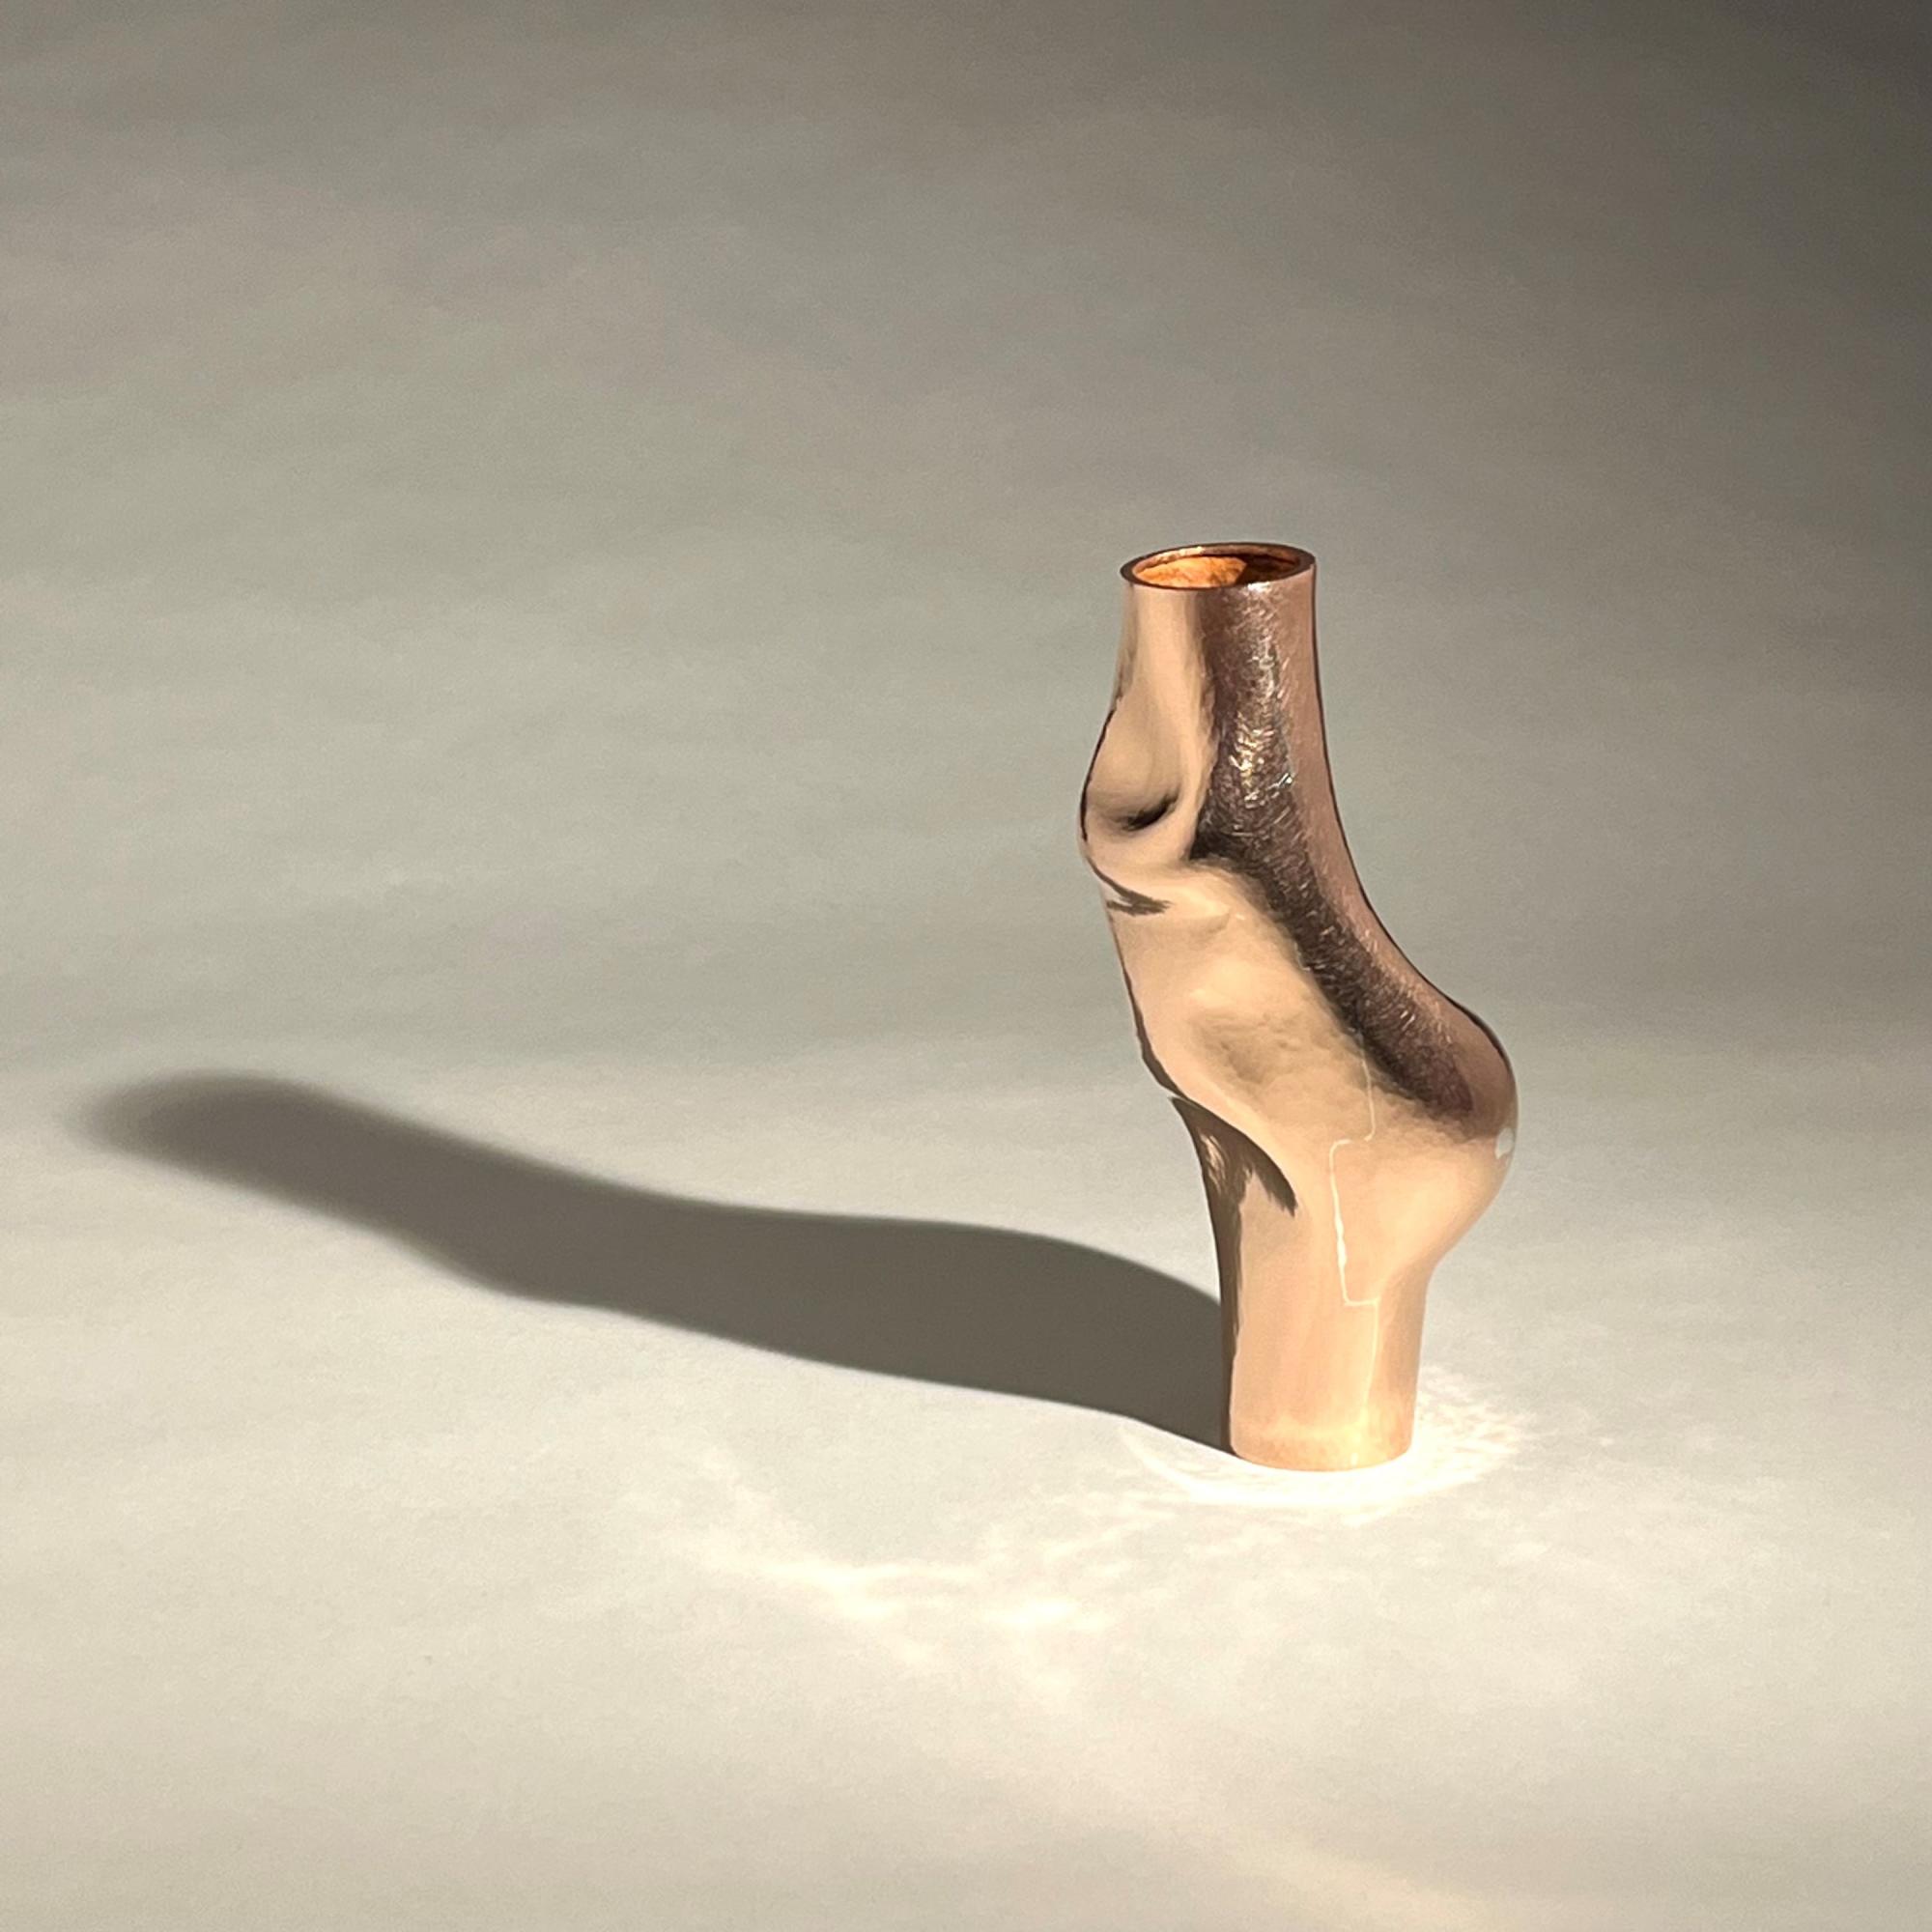 A copper vase. Its shadow is cast to the vases left and there is light being reflected at its base. 